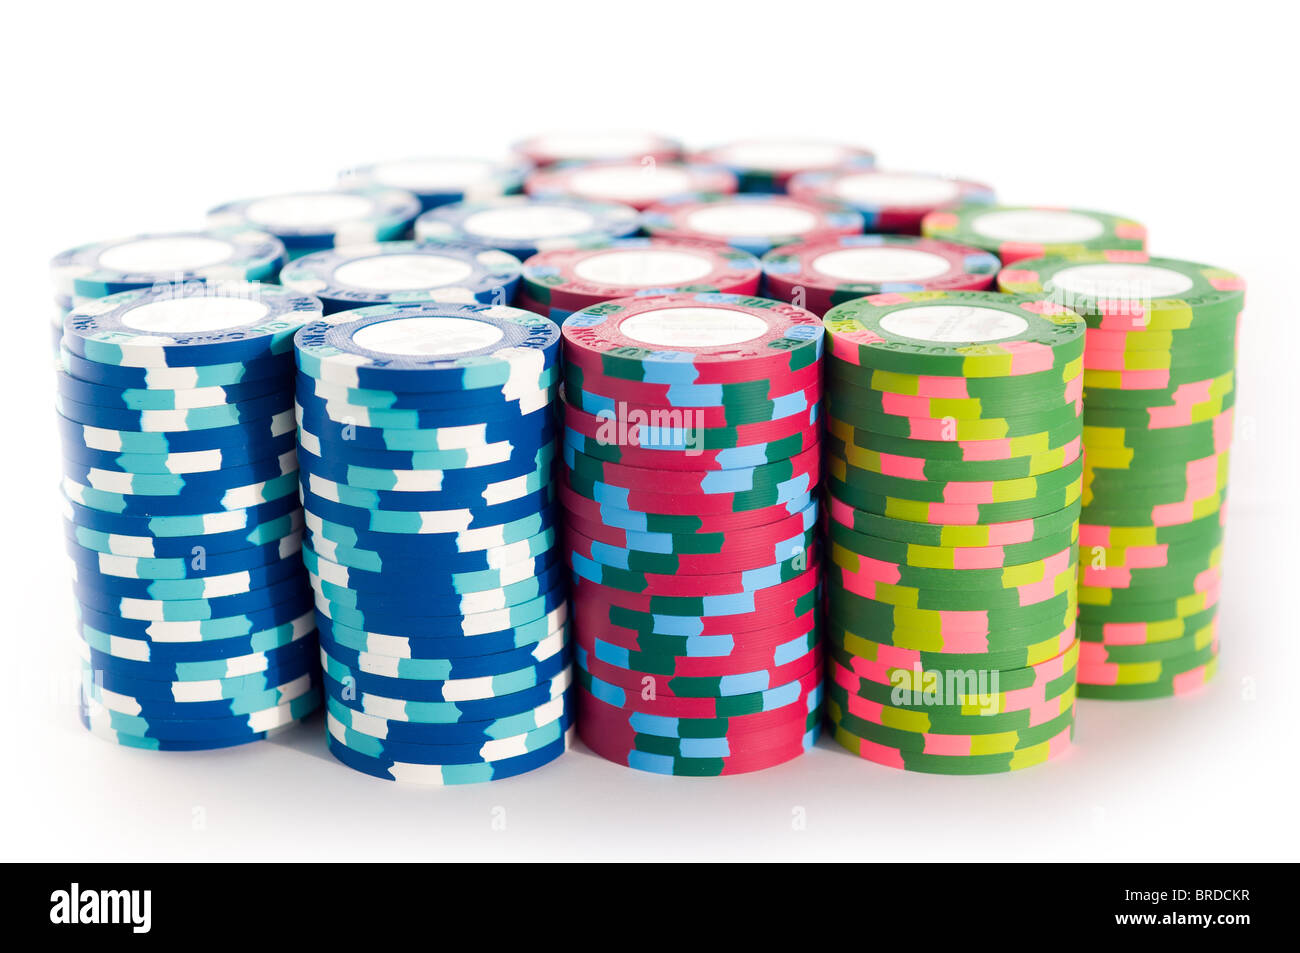 Real clay poker chip stacks Stock Photo